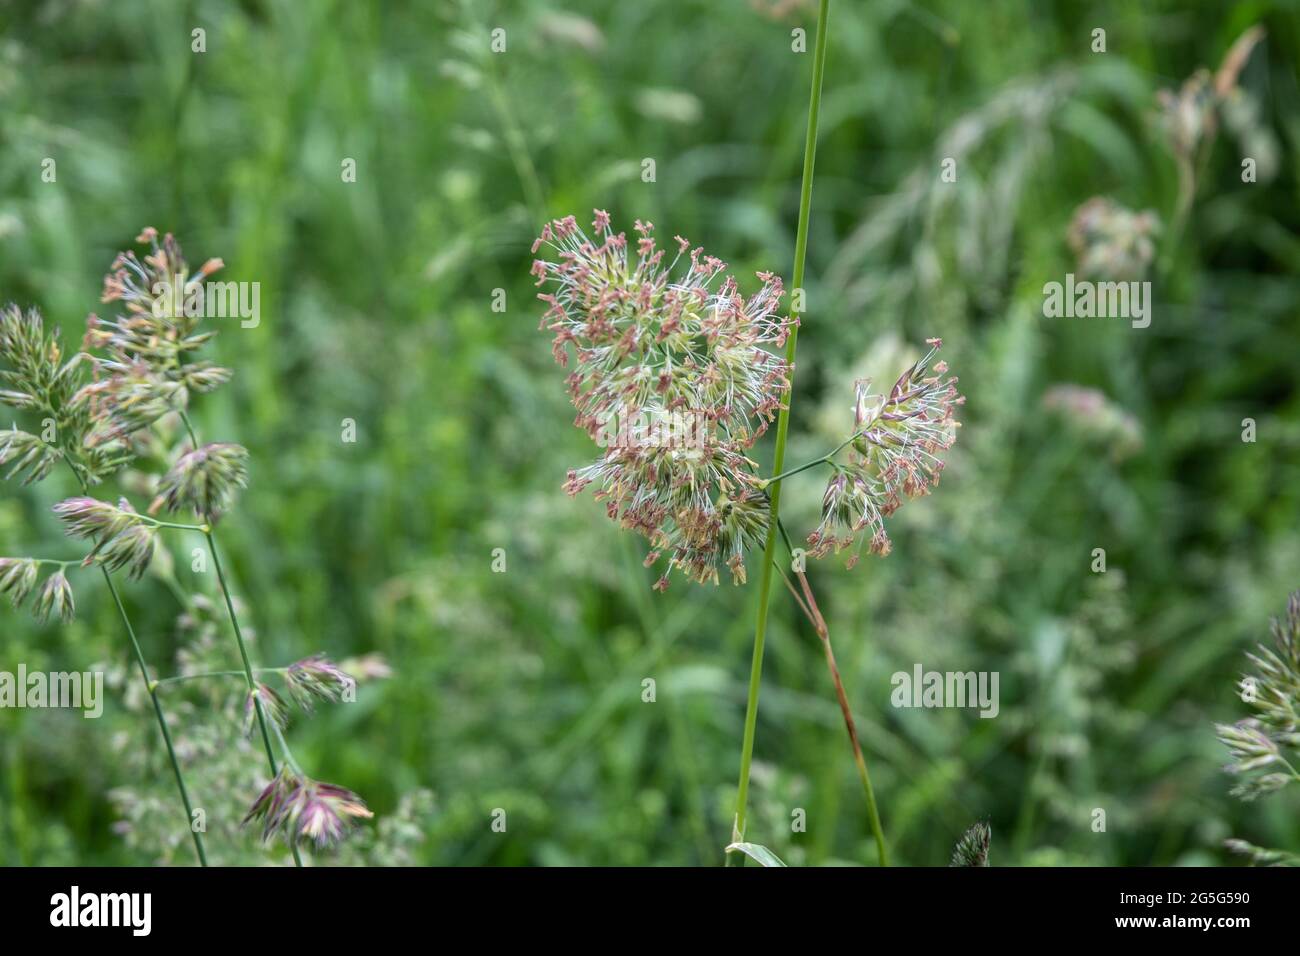 close-up of the panicle flower of an orchard grass in a meadow in springtime Stock Photo